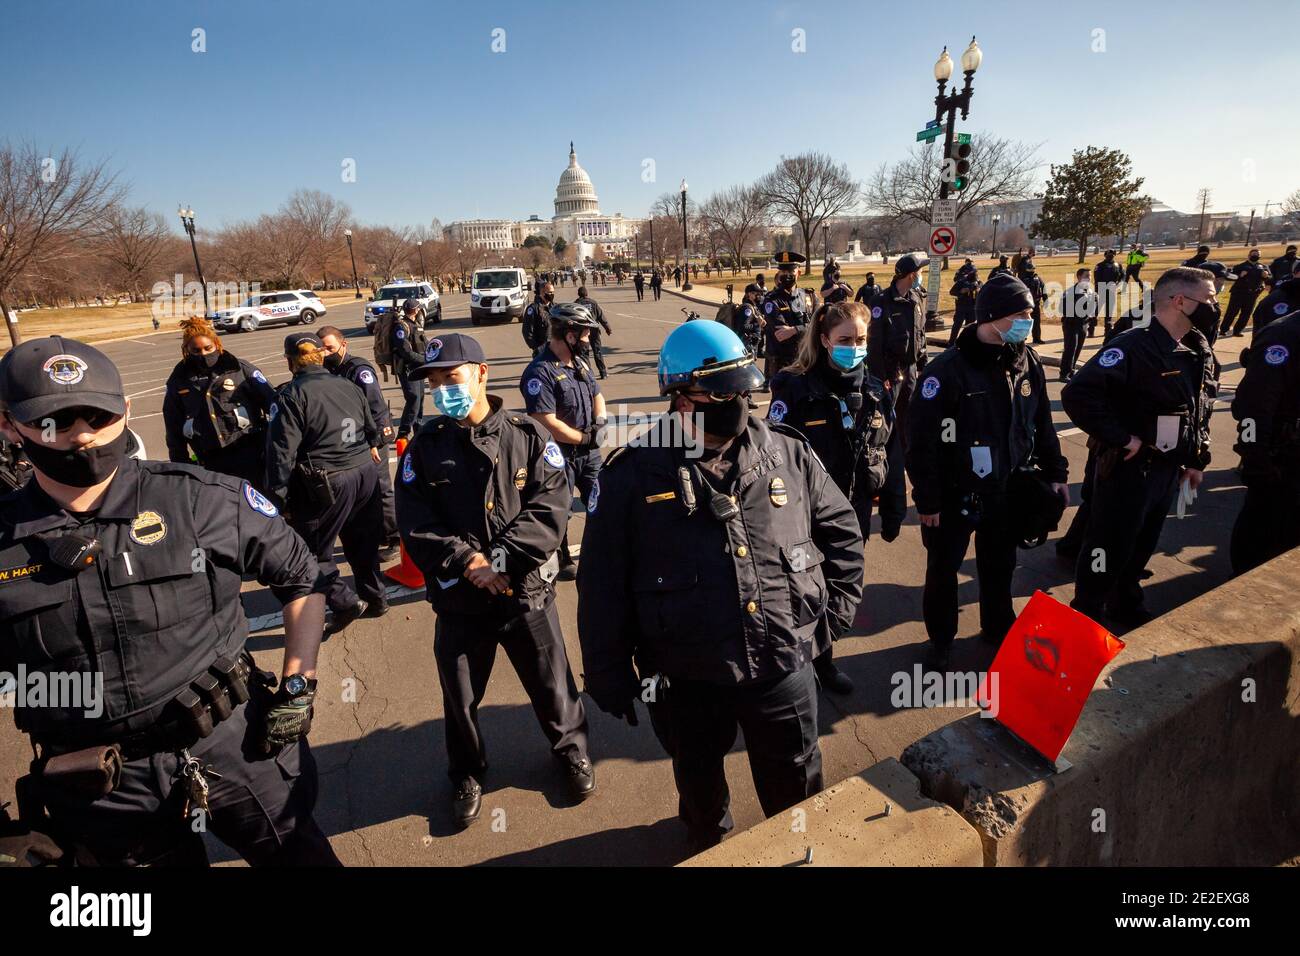 Washington, DC, USA, 13 January, 2021.  Pictured: Capitol Police met Shutdown DC's Expel All Fascists protest with an overwhelming number of officers who pushed demonstrators out of open, public areas at the Capitol, violating their First Amendment right to free speech.  Protesters wrote the names of Representatives and Senators who objected to certification of the presidential election results on January 6 on three large banners.  The banners called for expulsion of all fascists from Congress.  Credit: Allison C Bailey/Alamy Live News Stock Photo